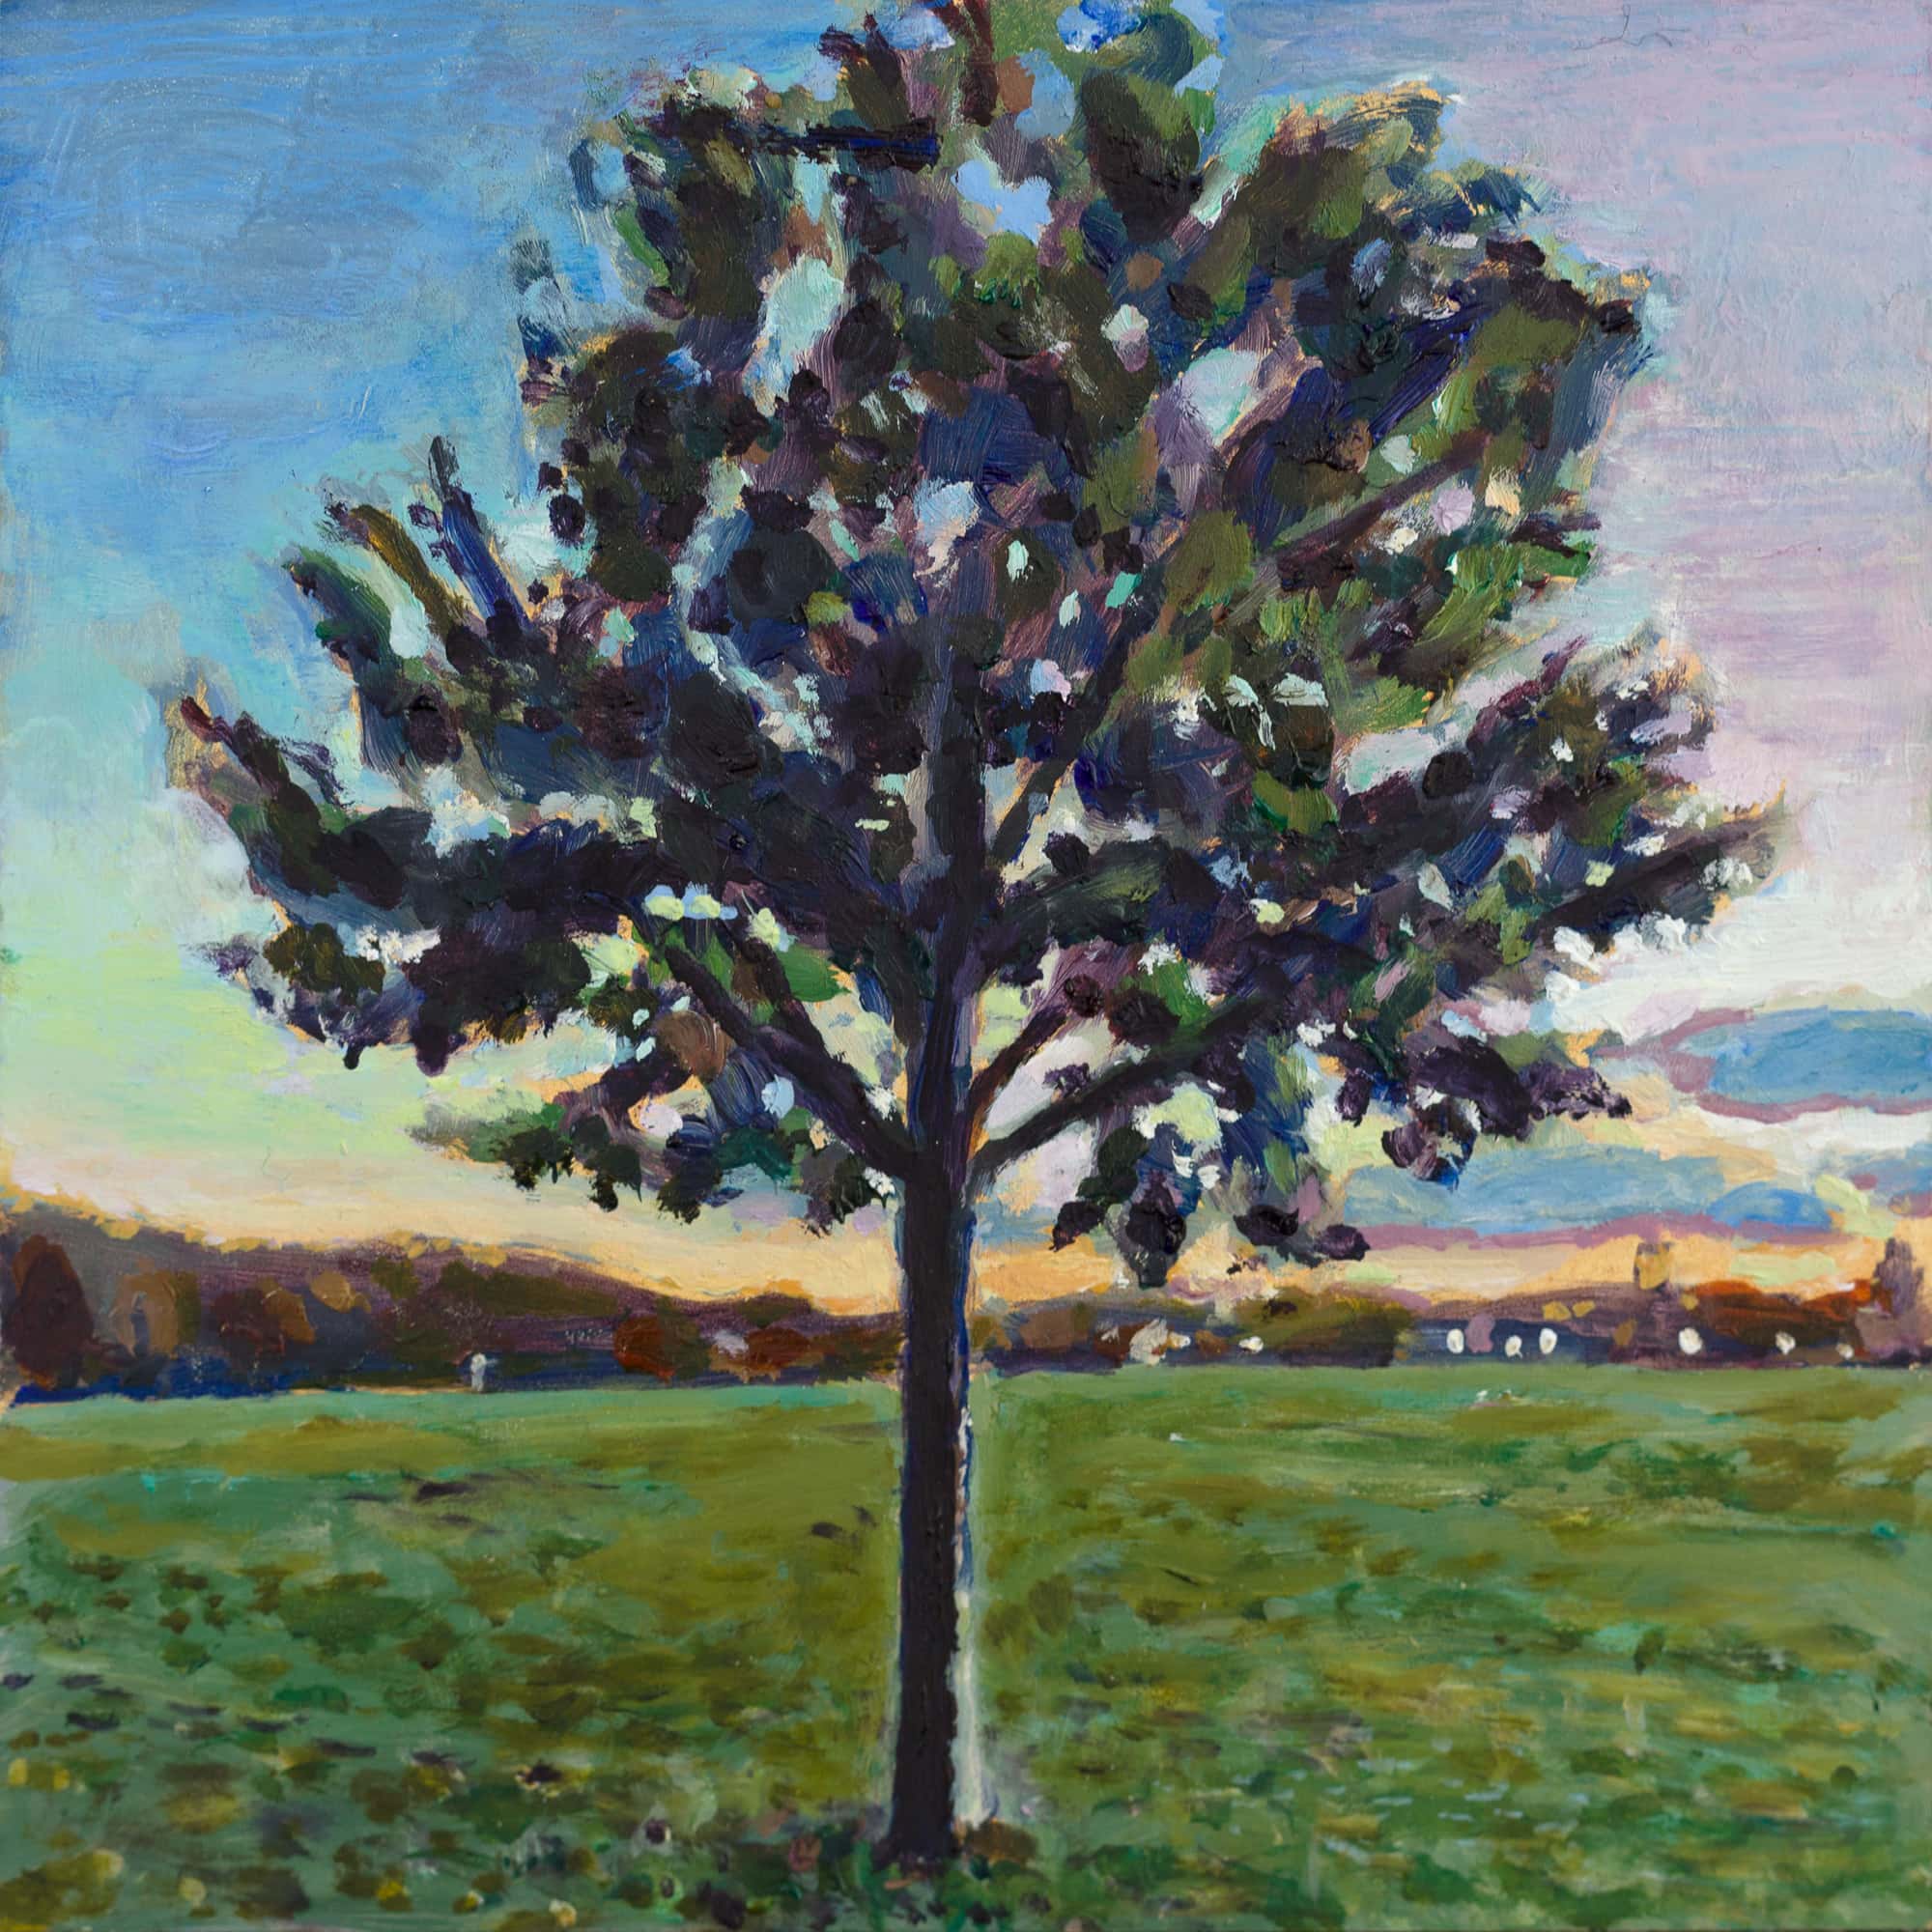 This 6x6 inch oil painting captures the serene beauty of an oak tree in Van Cortlandt Park at sunset. Artist Noel Hefele's piece reflects the tranquility and enduring presence of nature amidst the urban landscape. Painted as a thoughtful gift for the Mori family, it symbolizes the deep-rooted connections and the natural heritage their name, 'forest', embodies. The painting is a fusion of the artist's appreciation for natural landscapes and his skill in depicting the subtle interplay of light and shadow.